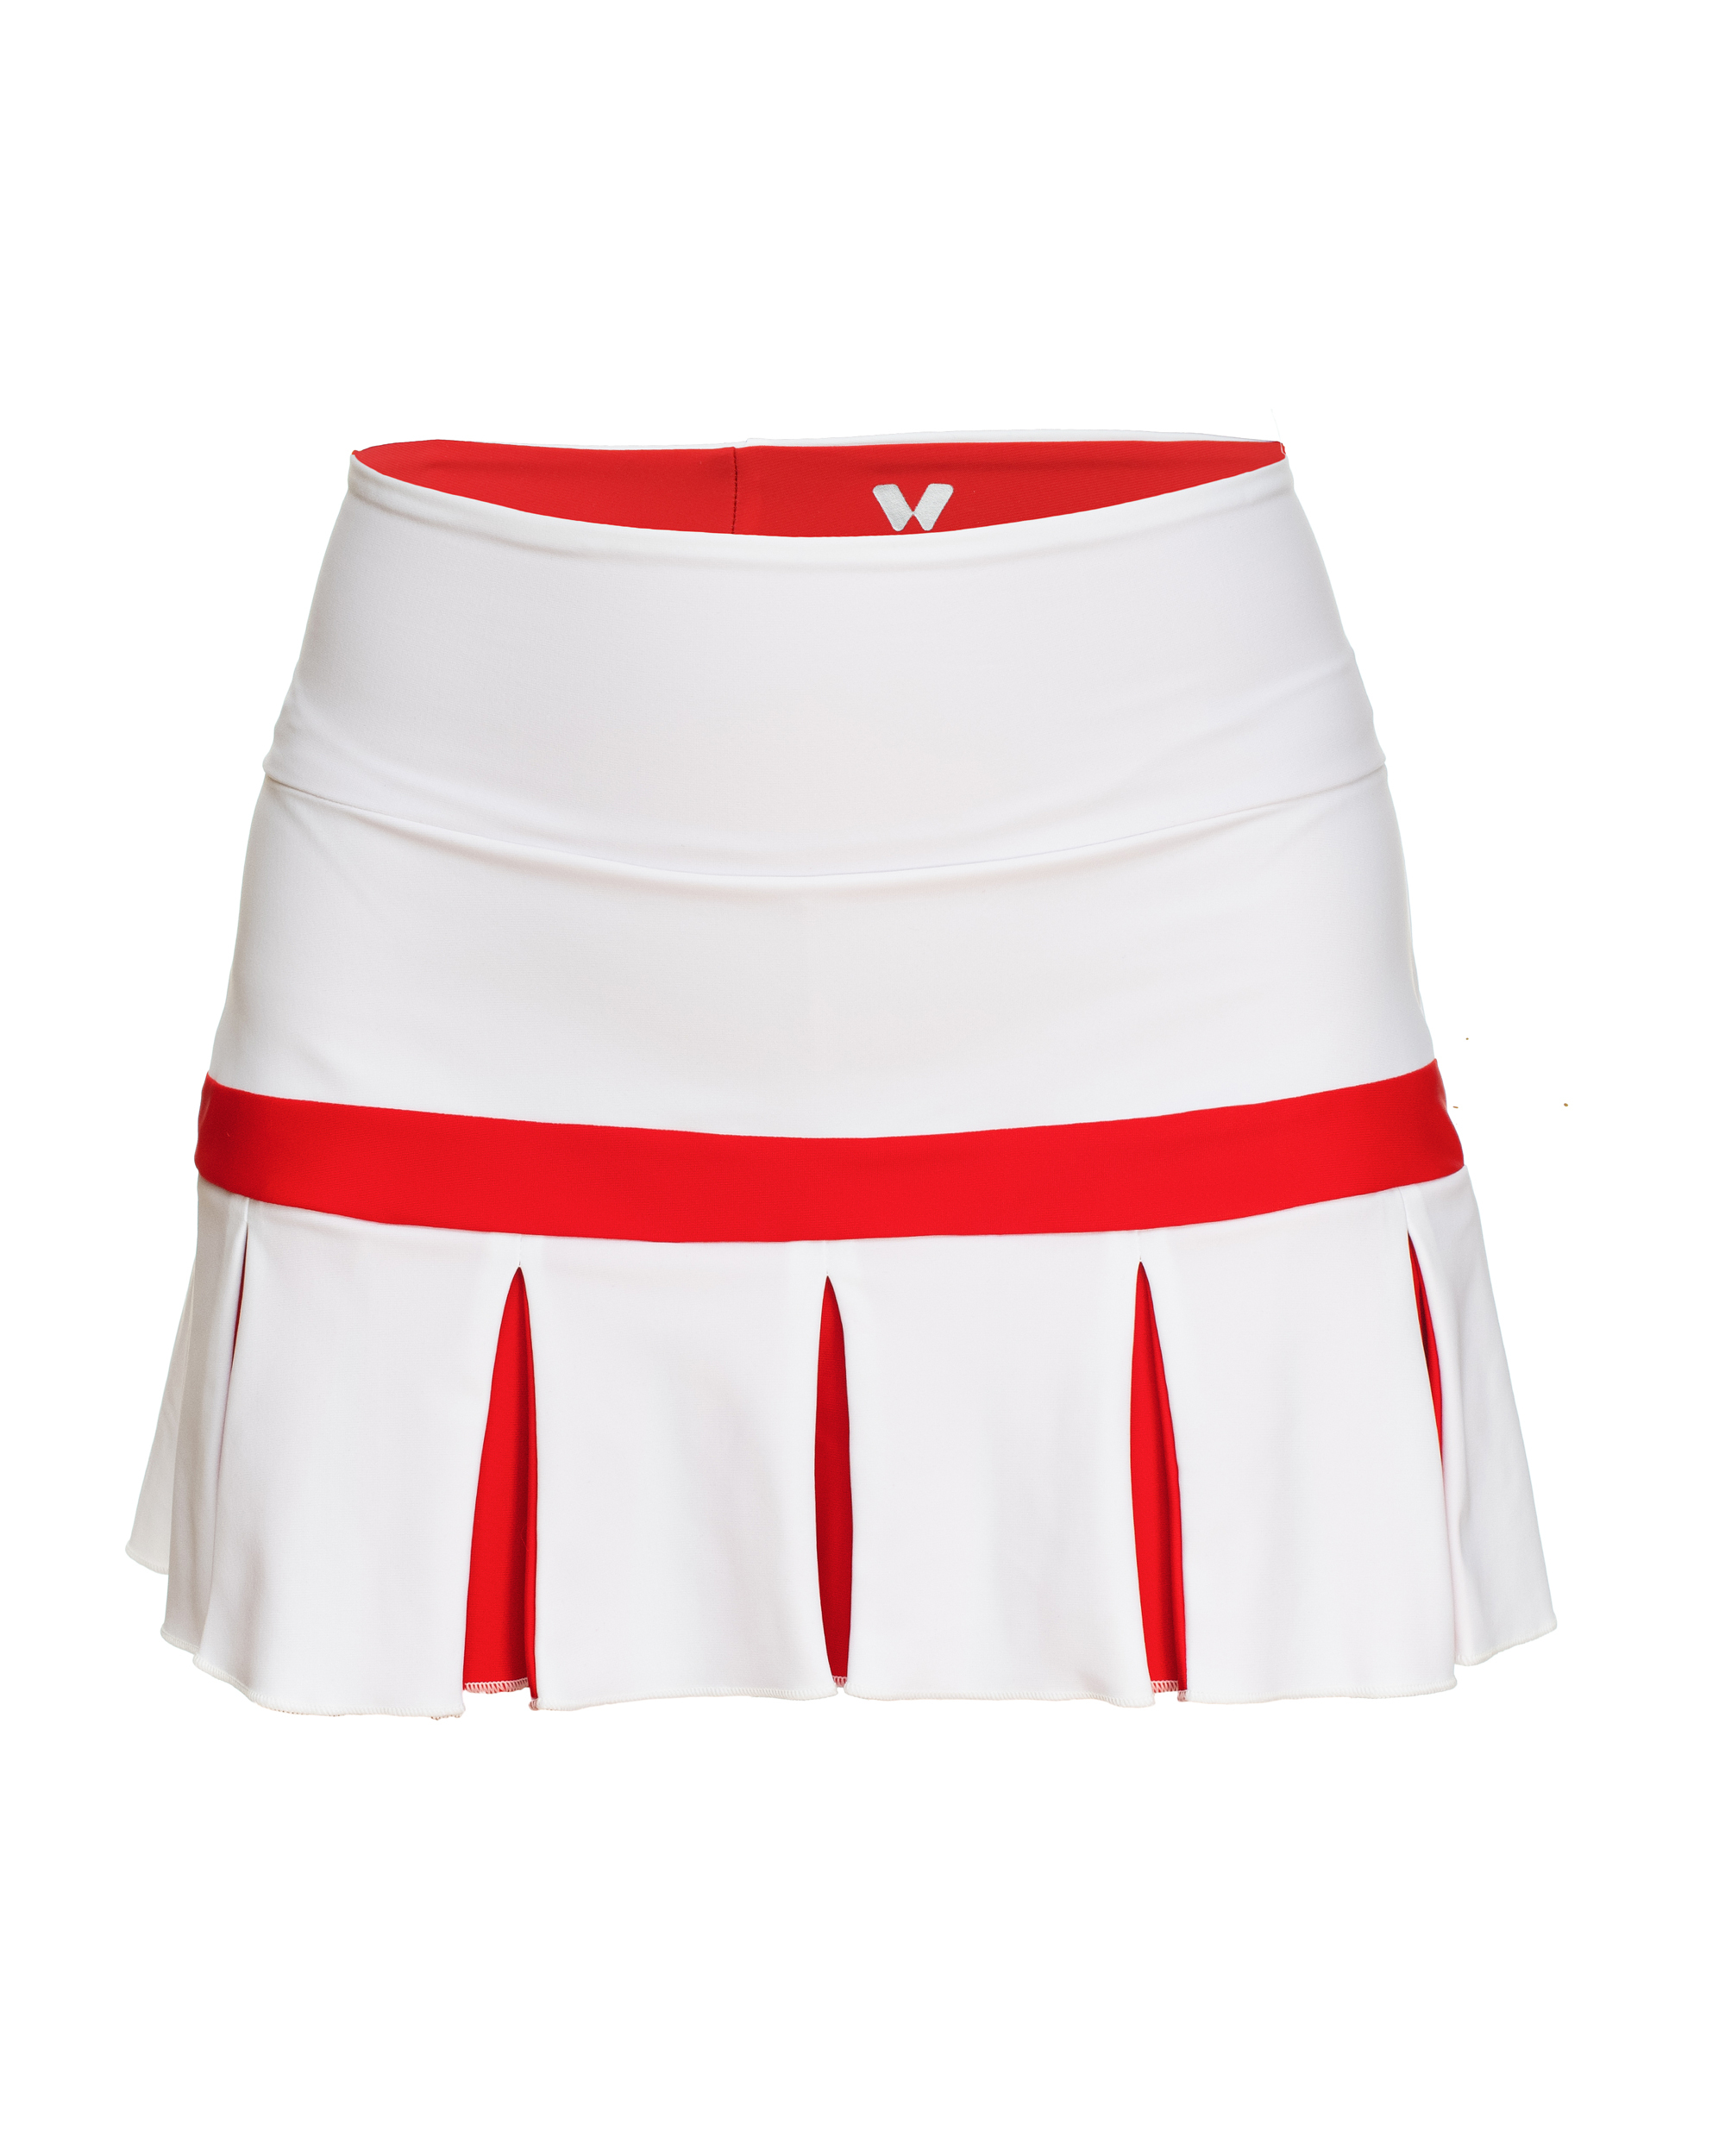 TENNIS SKIRT WHITE JAPAN COLLECTION